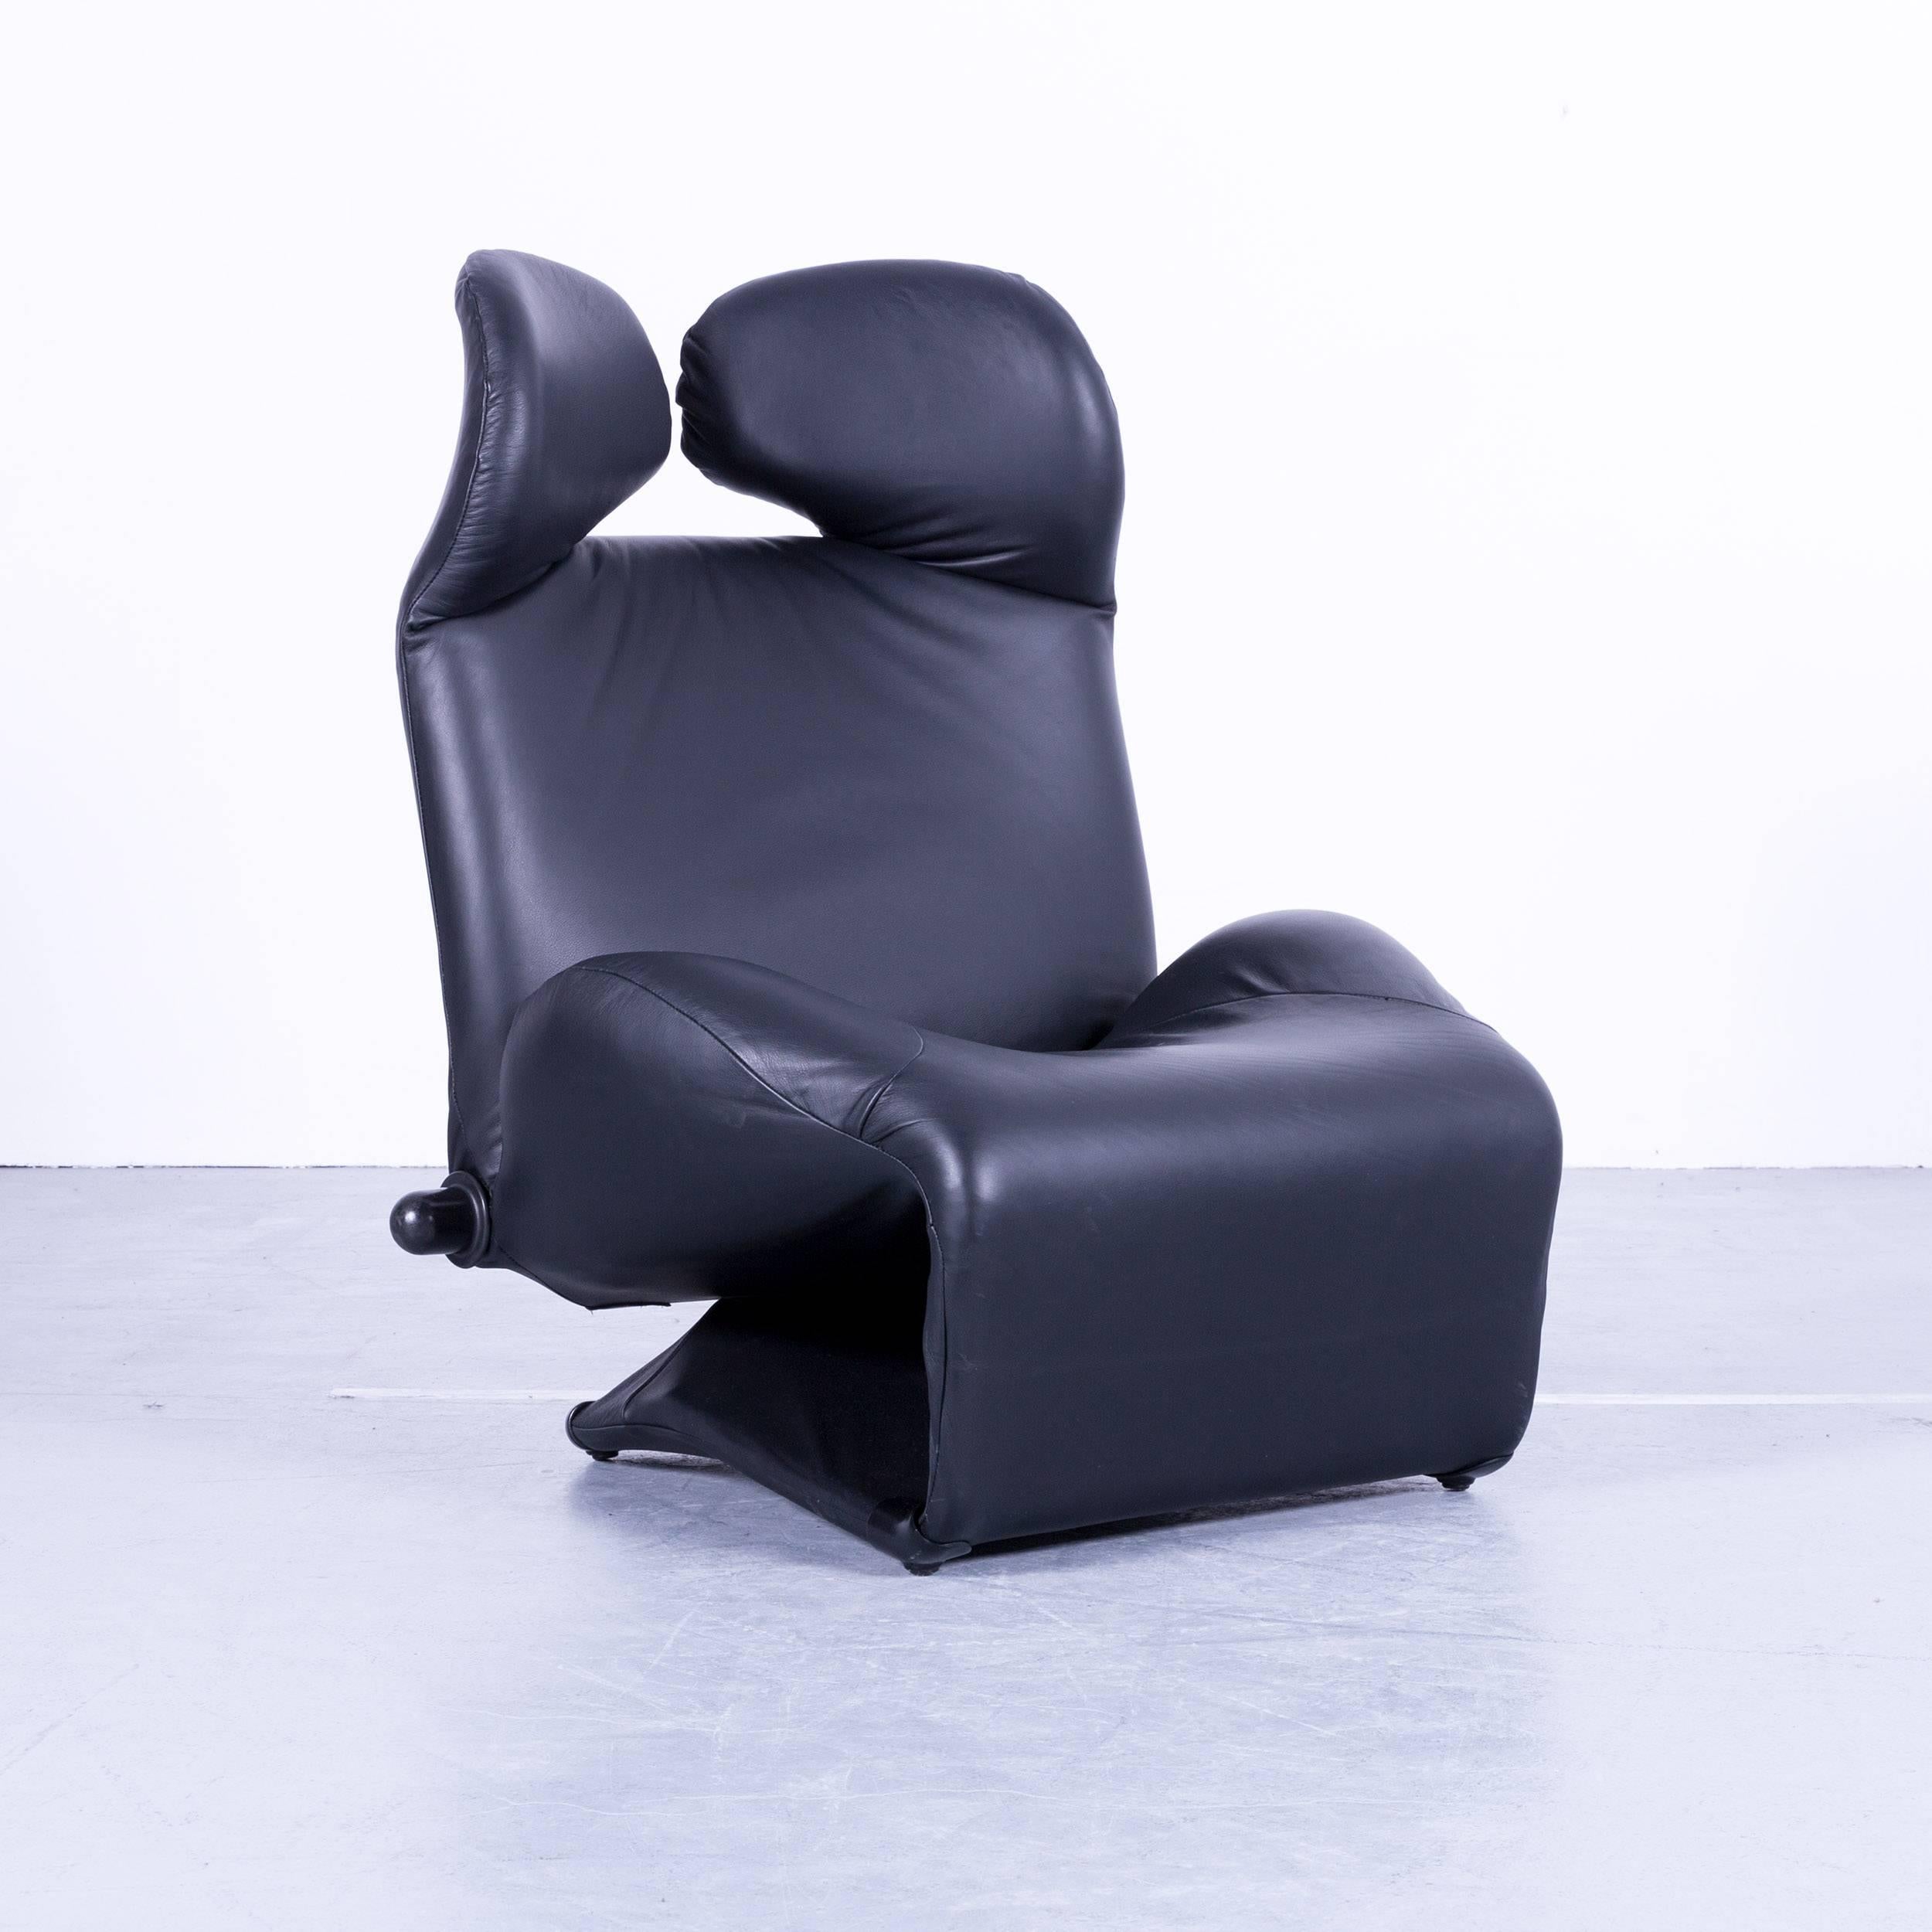 Cassina Wink designer chair black leather function recliner by Toshiyuki Kita, in a minimalistic and modern design, with convenient functions, made for pure comfort.